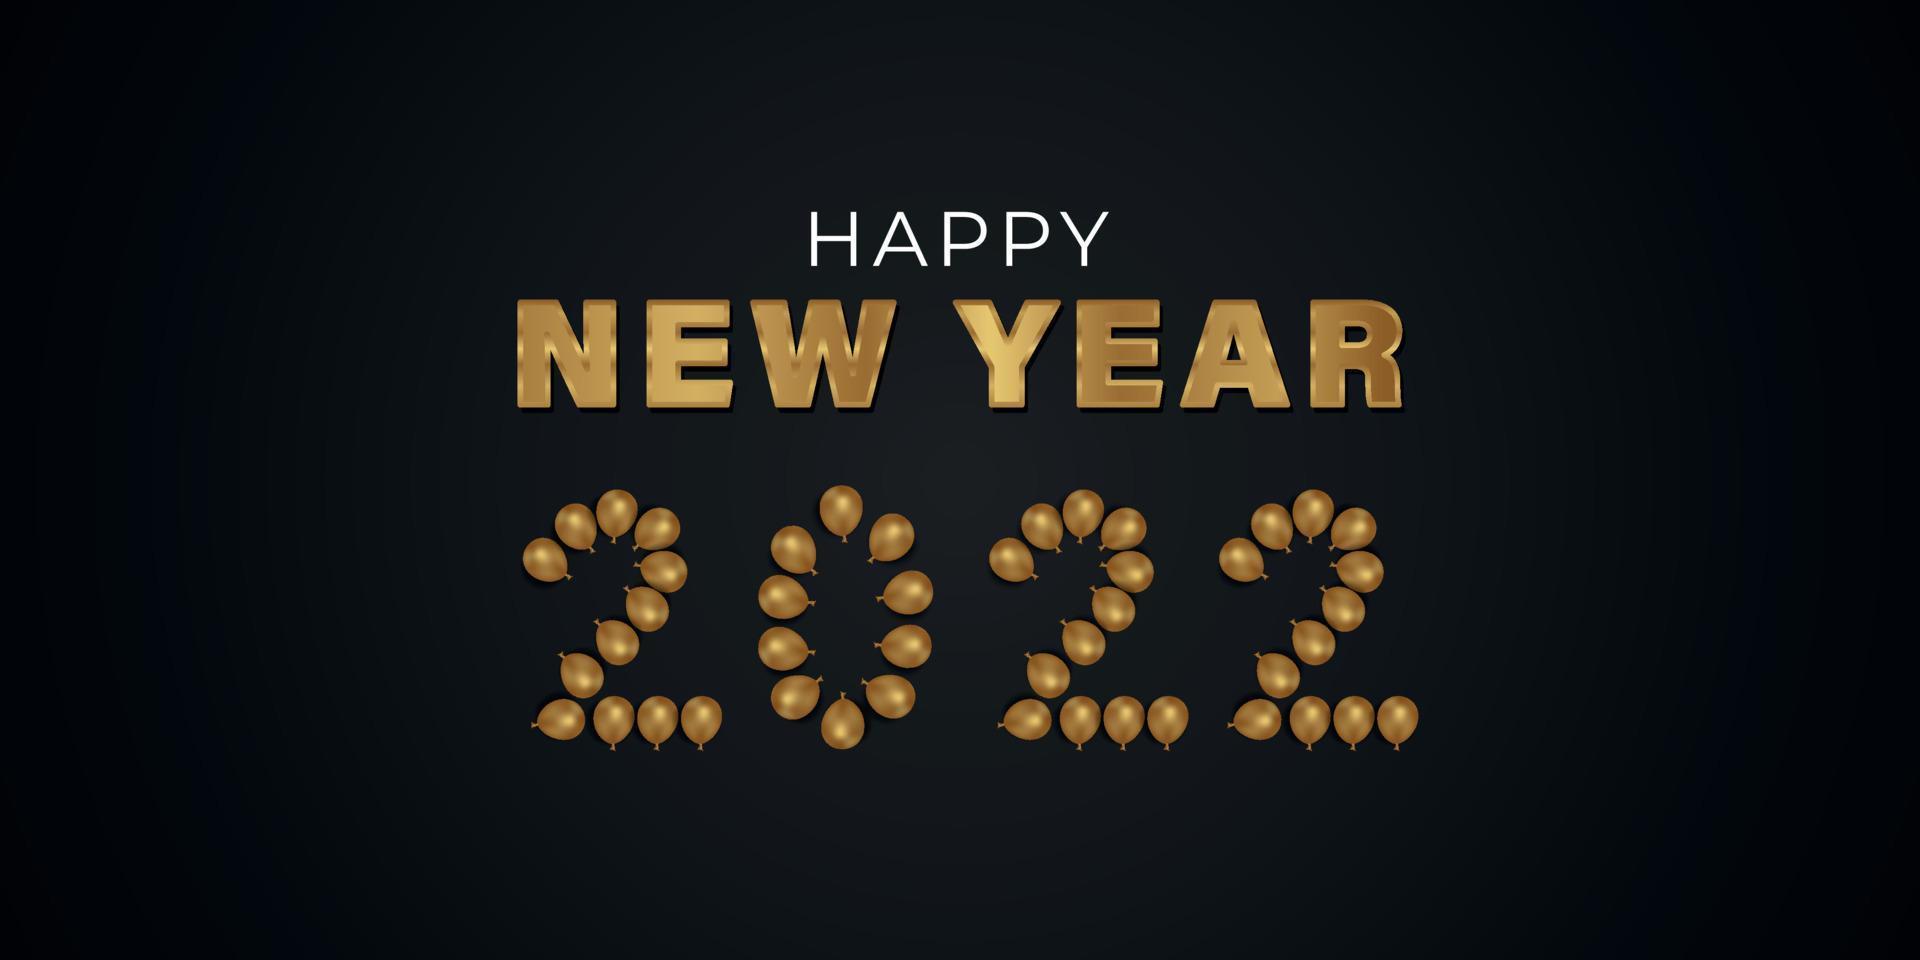 Happy New Year 2022 3D balloons and Golden text effect on a black background vector